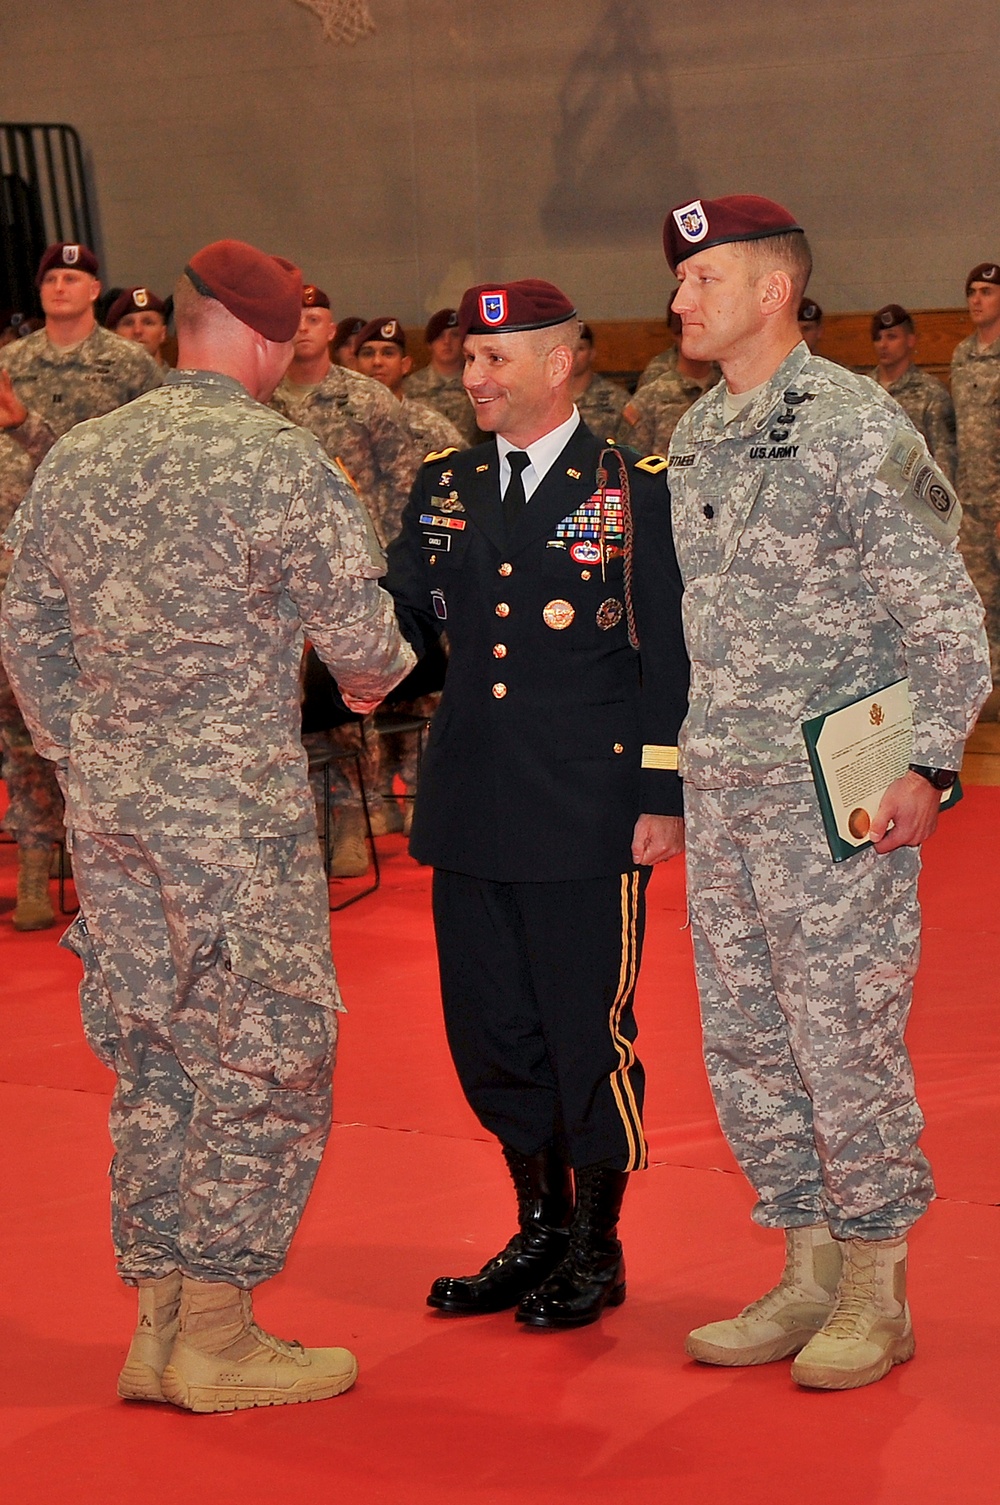 Profile of a hero: Paratrooper earns Soldier’s Medal